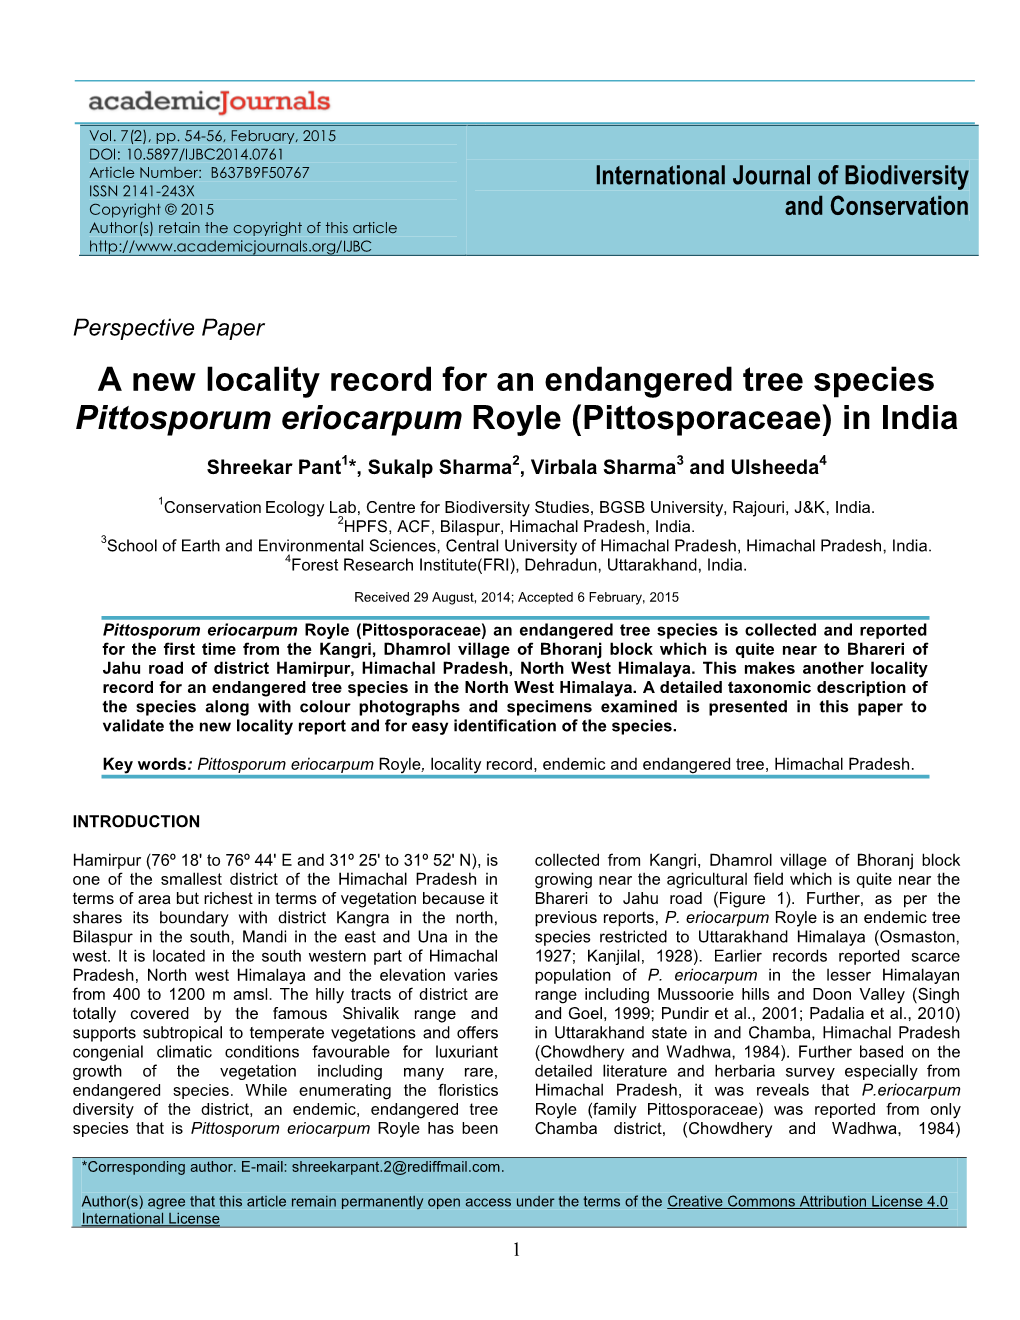 A New Locality Record for an Endemic Endangered Tree Species